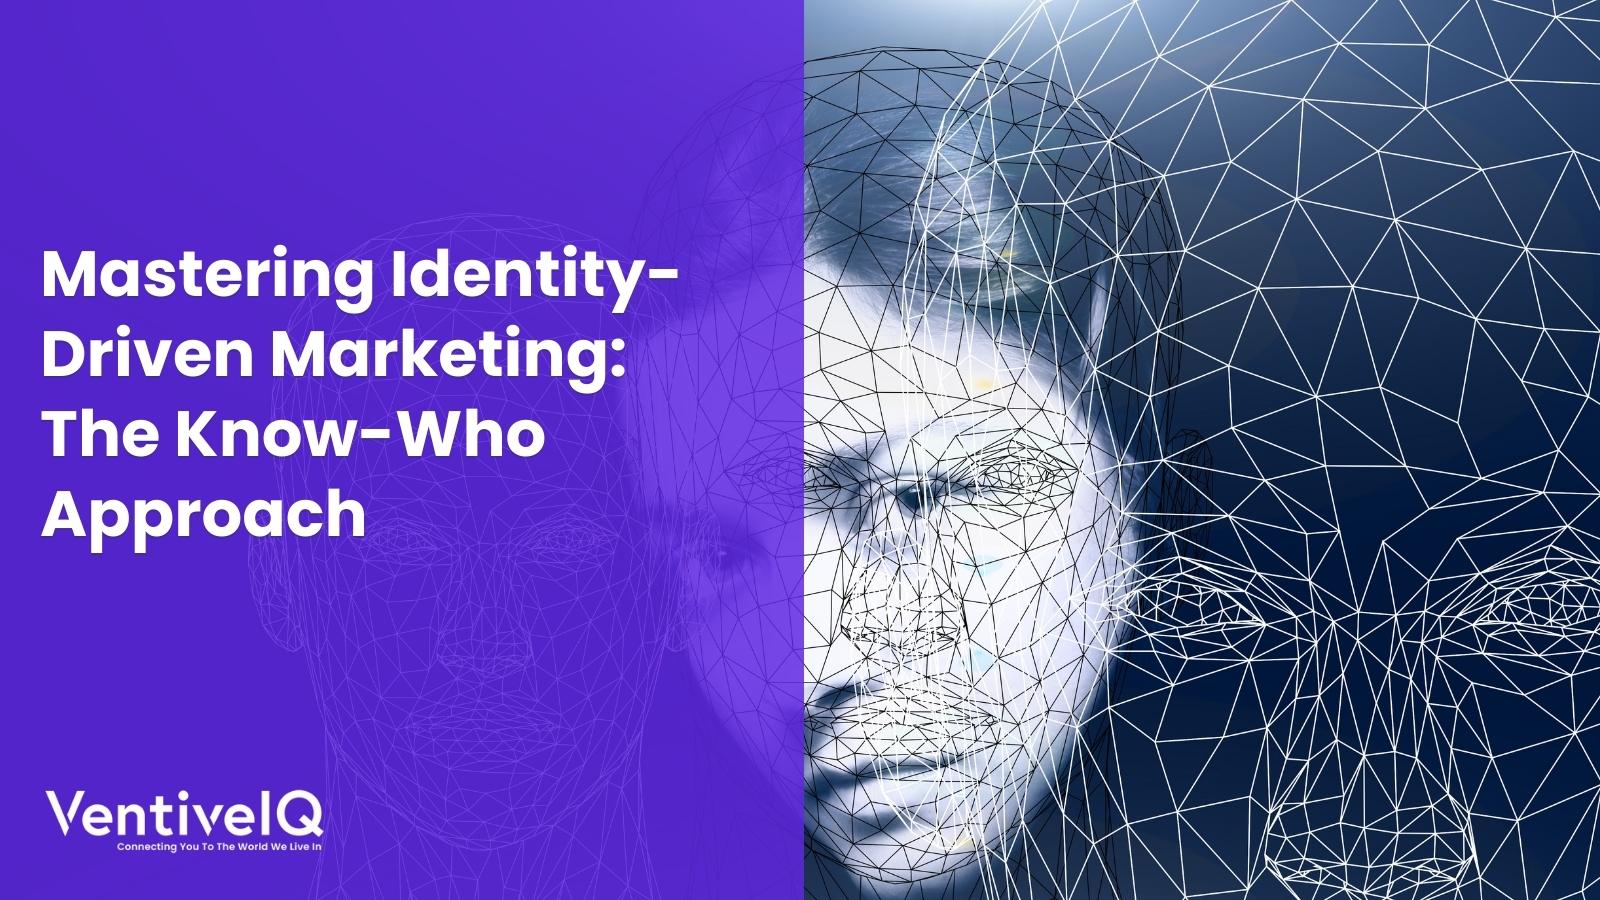 Mastering Identity-Driven Marketing: The Know-Who Approach